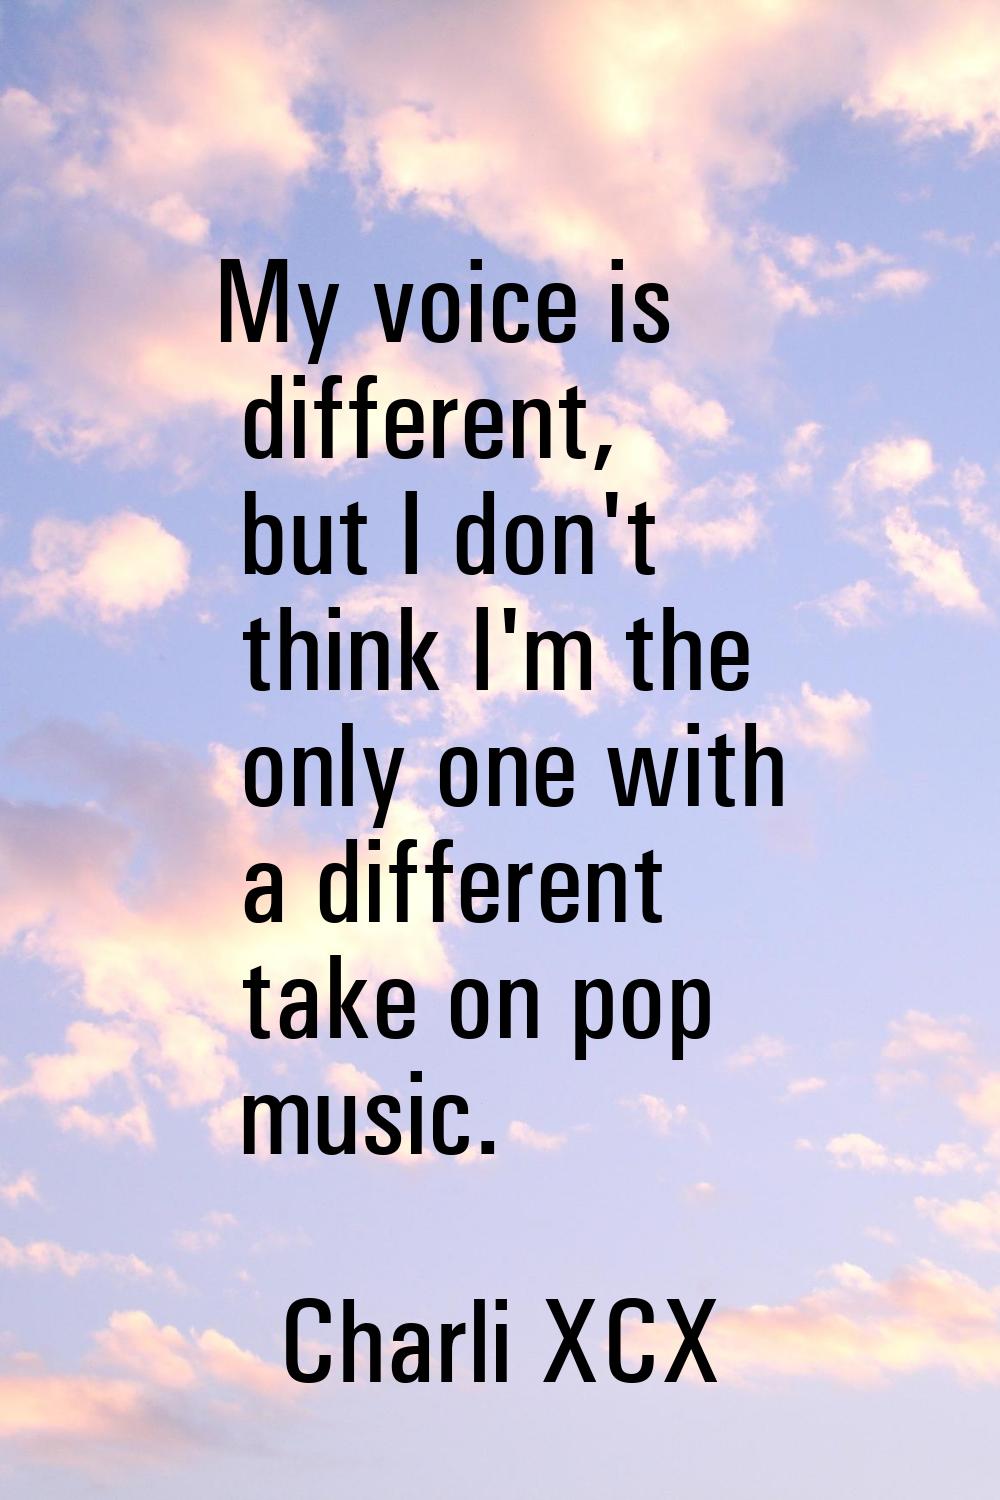 My voice is different, but I don't think I'm the only one with a different take on pop music.